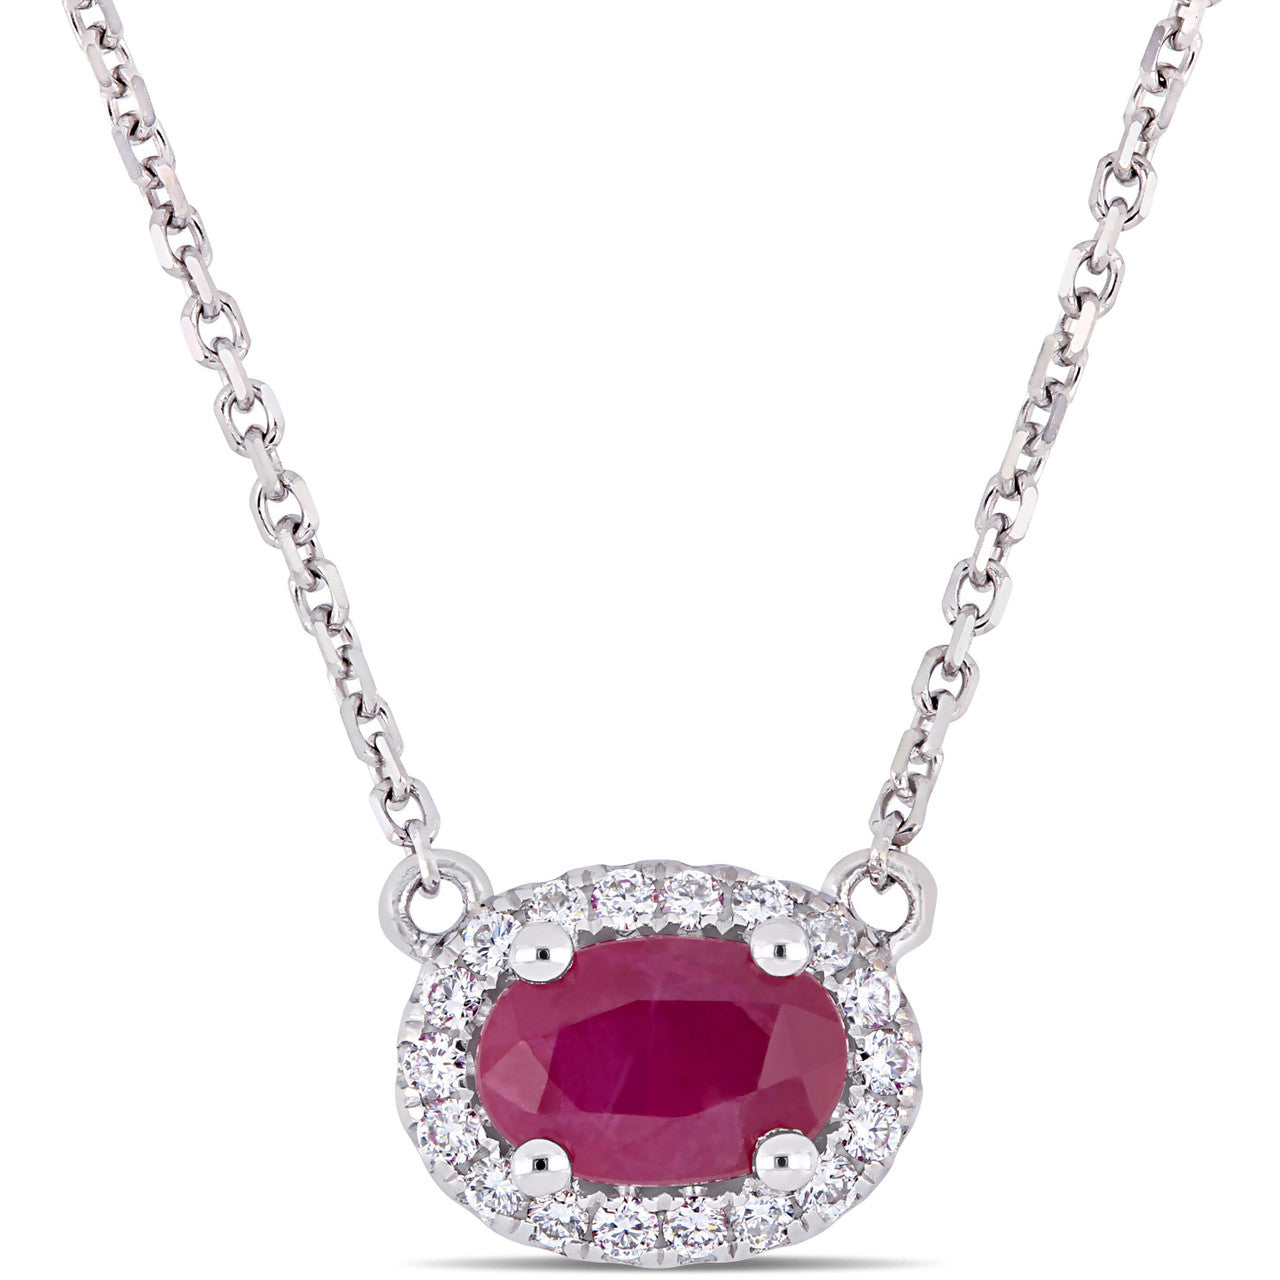 Ice Jewellery 1/10 CT Diamond TW and 3/5 CT TGW Ruby-CN Necklace With Chain in 14k White Gold - 75000004926 | Ice Jewellery Australia